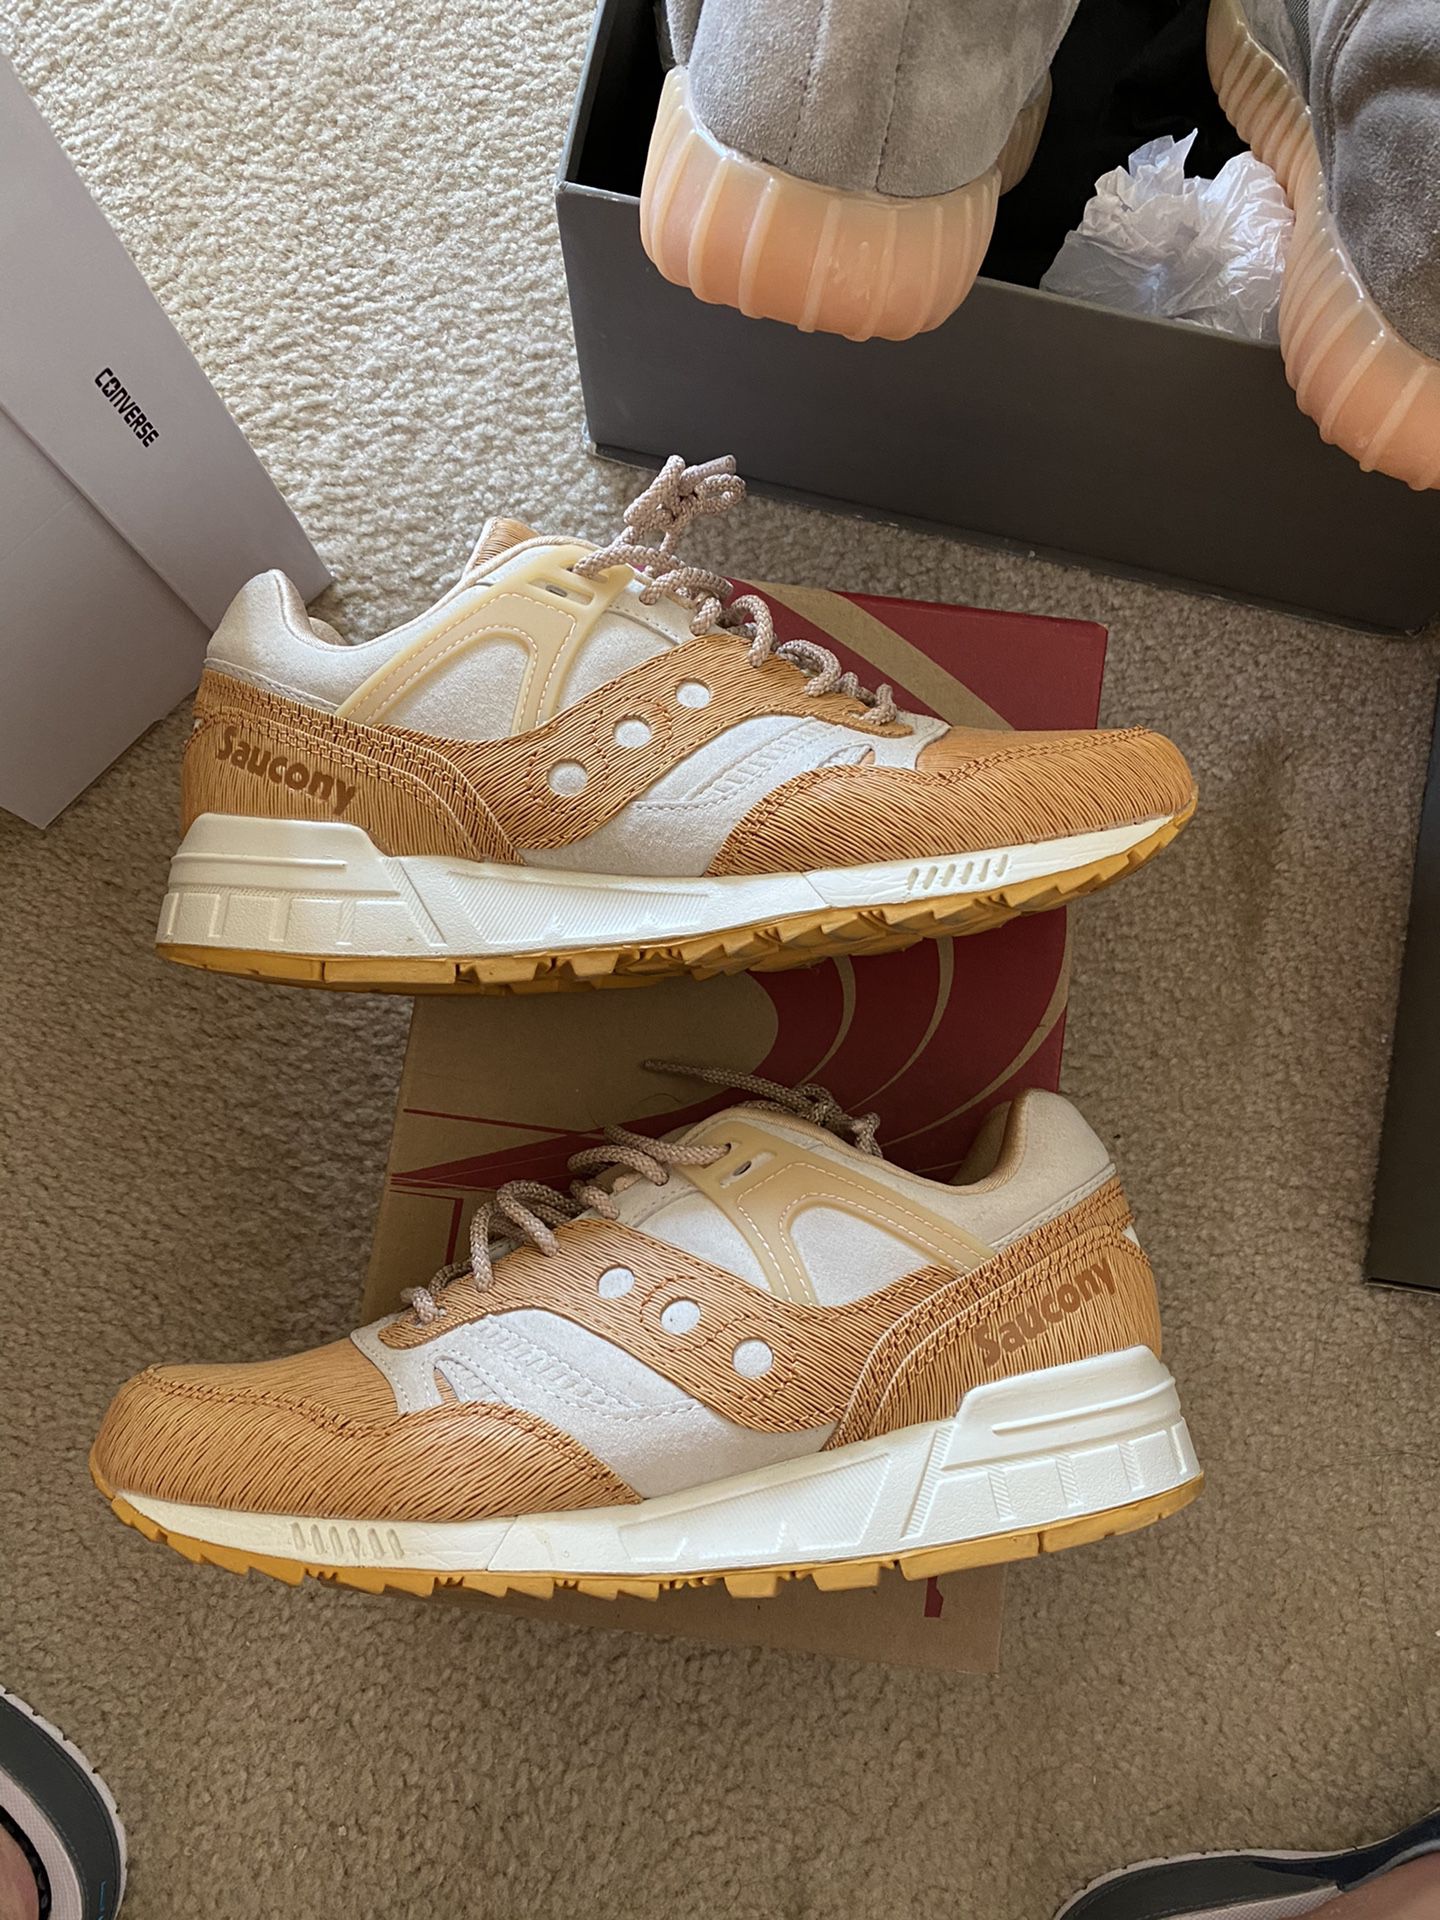 Saucony grid SD HT size 9.5 VNDS